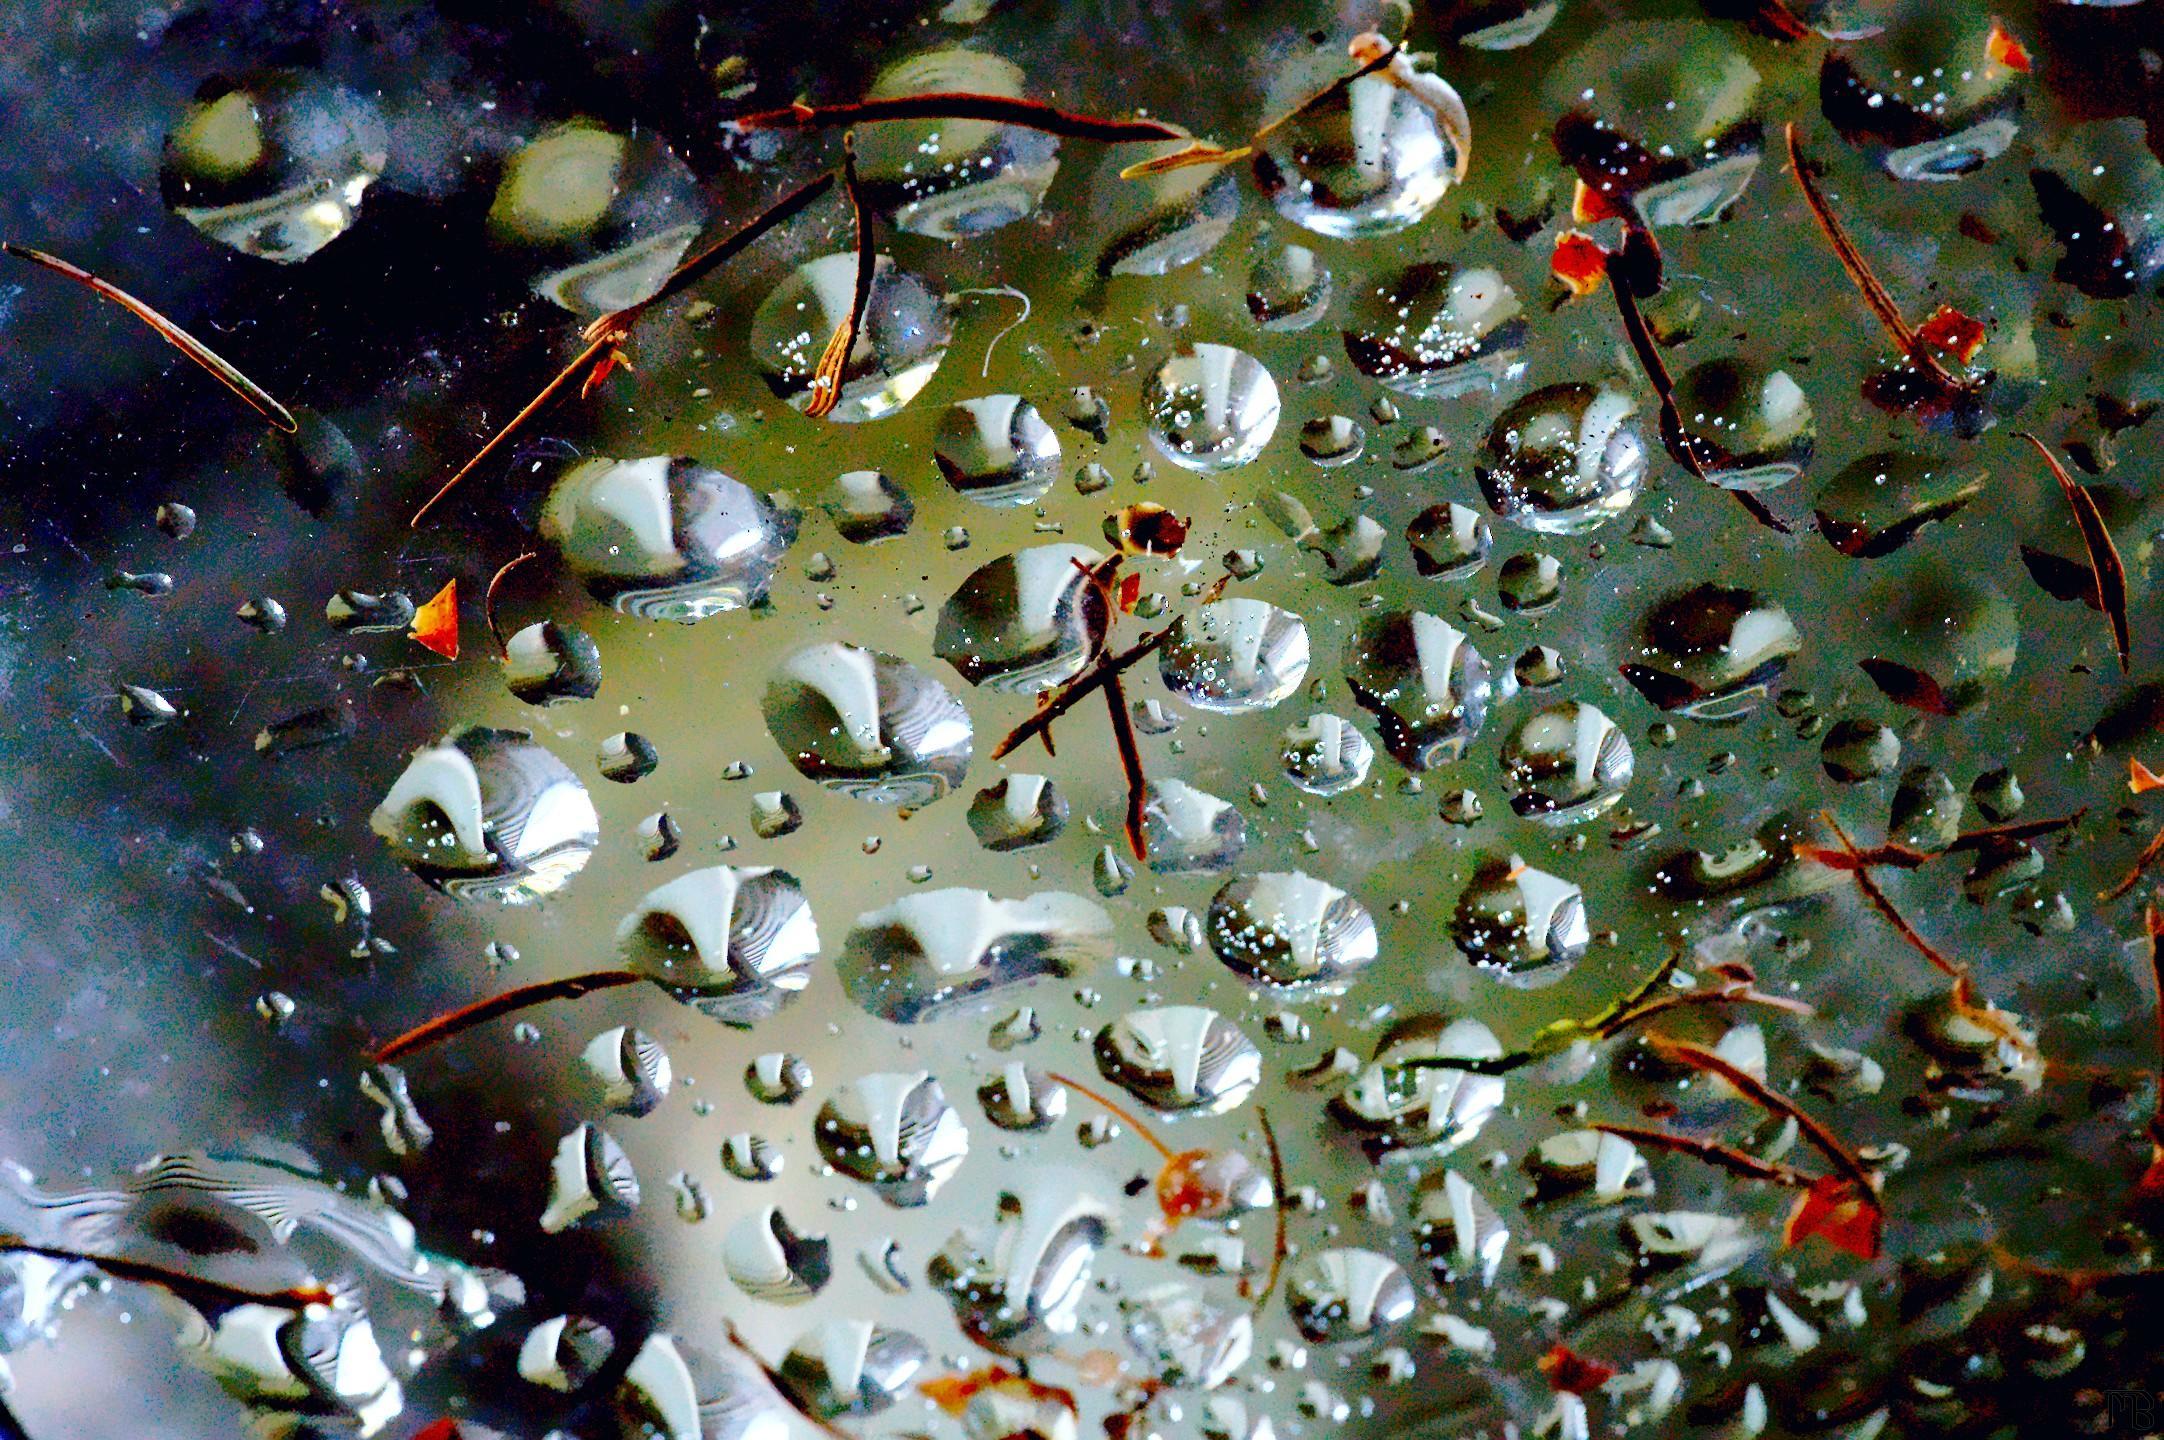 Arty water drops on glass